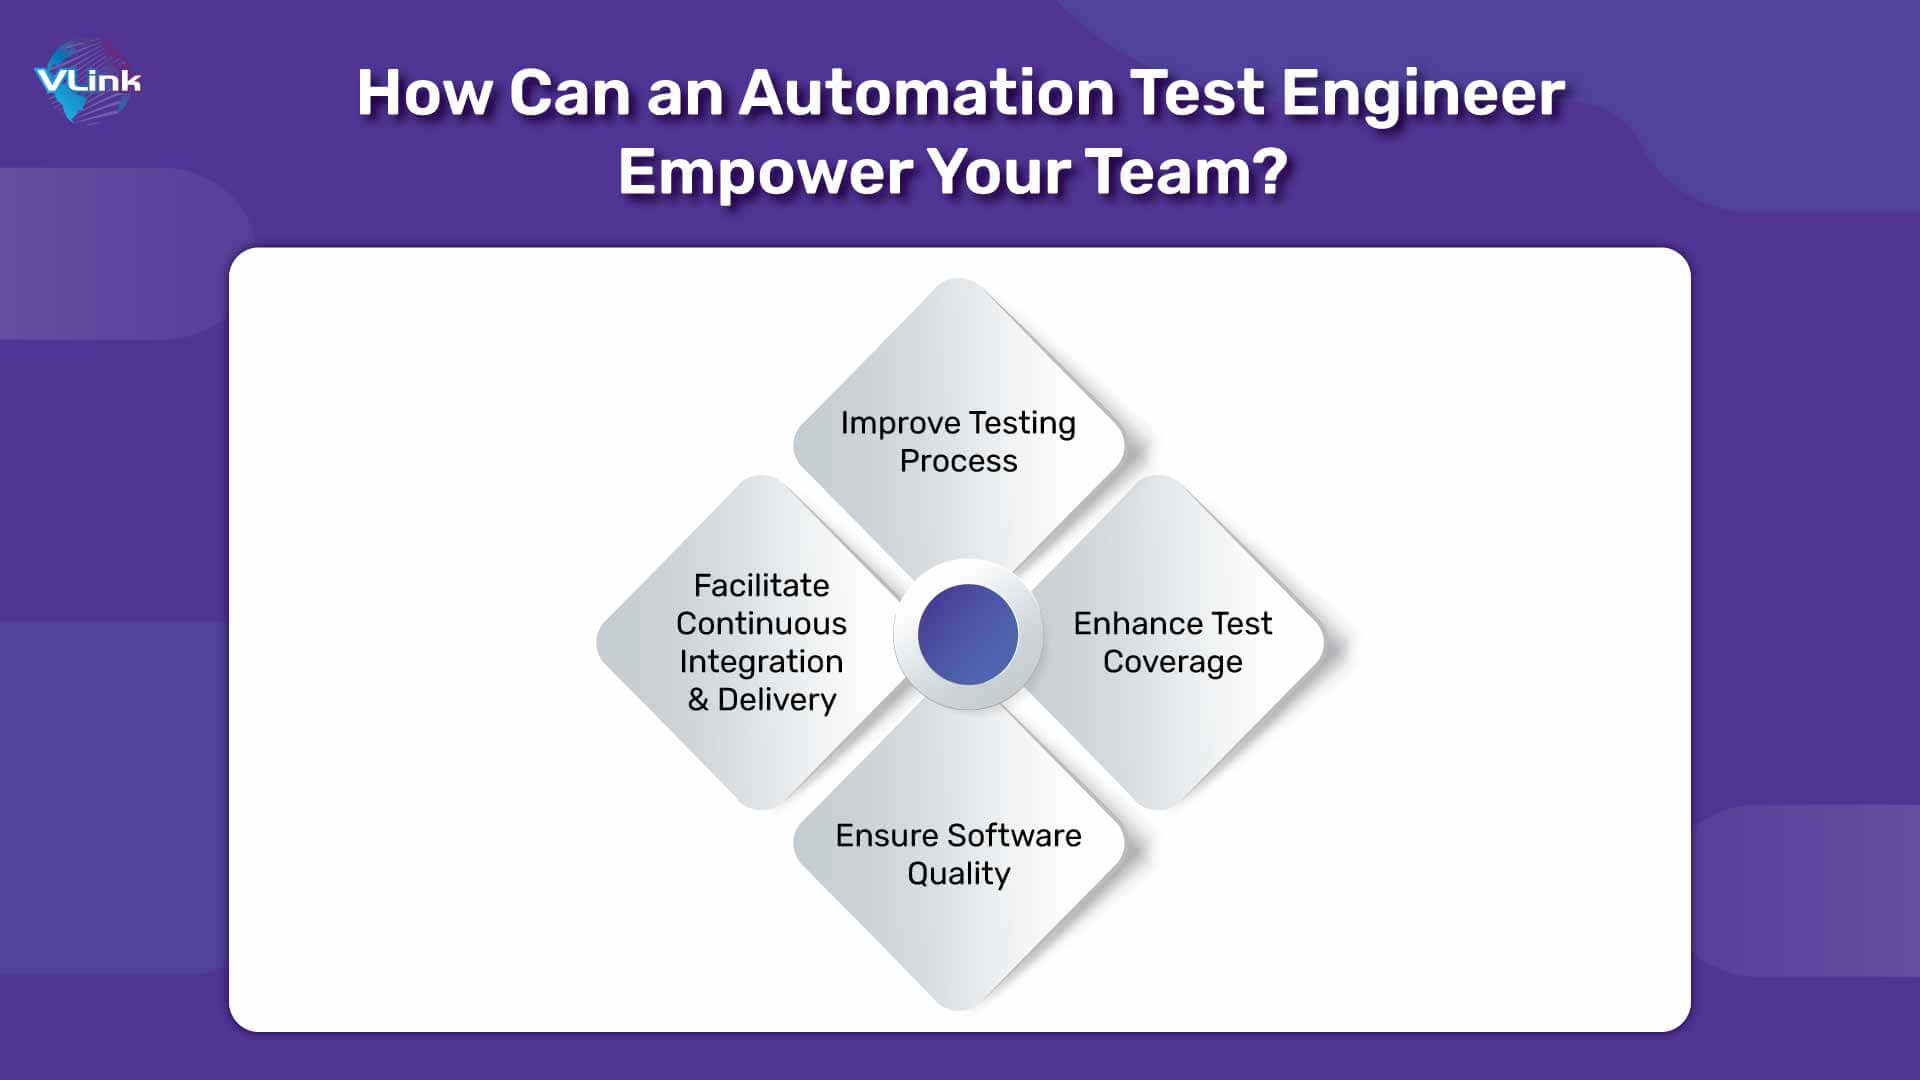 How Can an Automation Test Engineer Empower Your Team